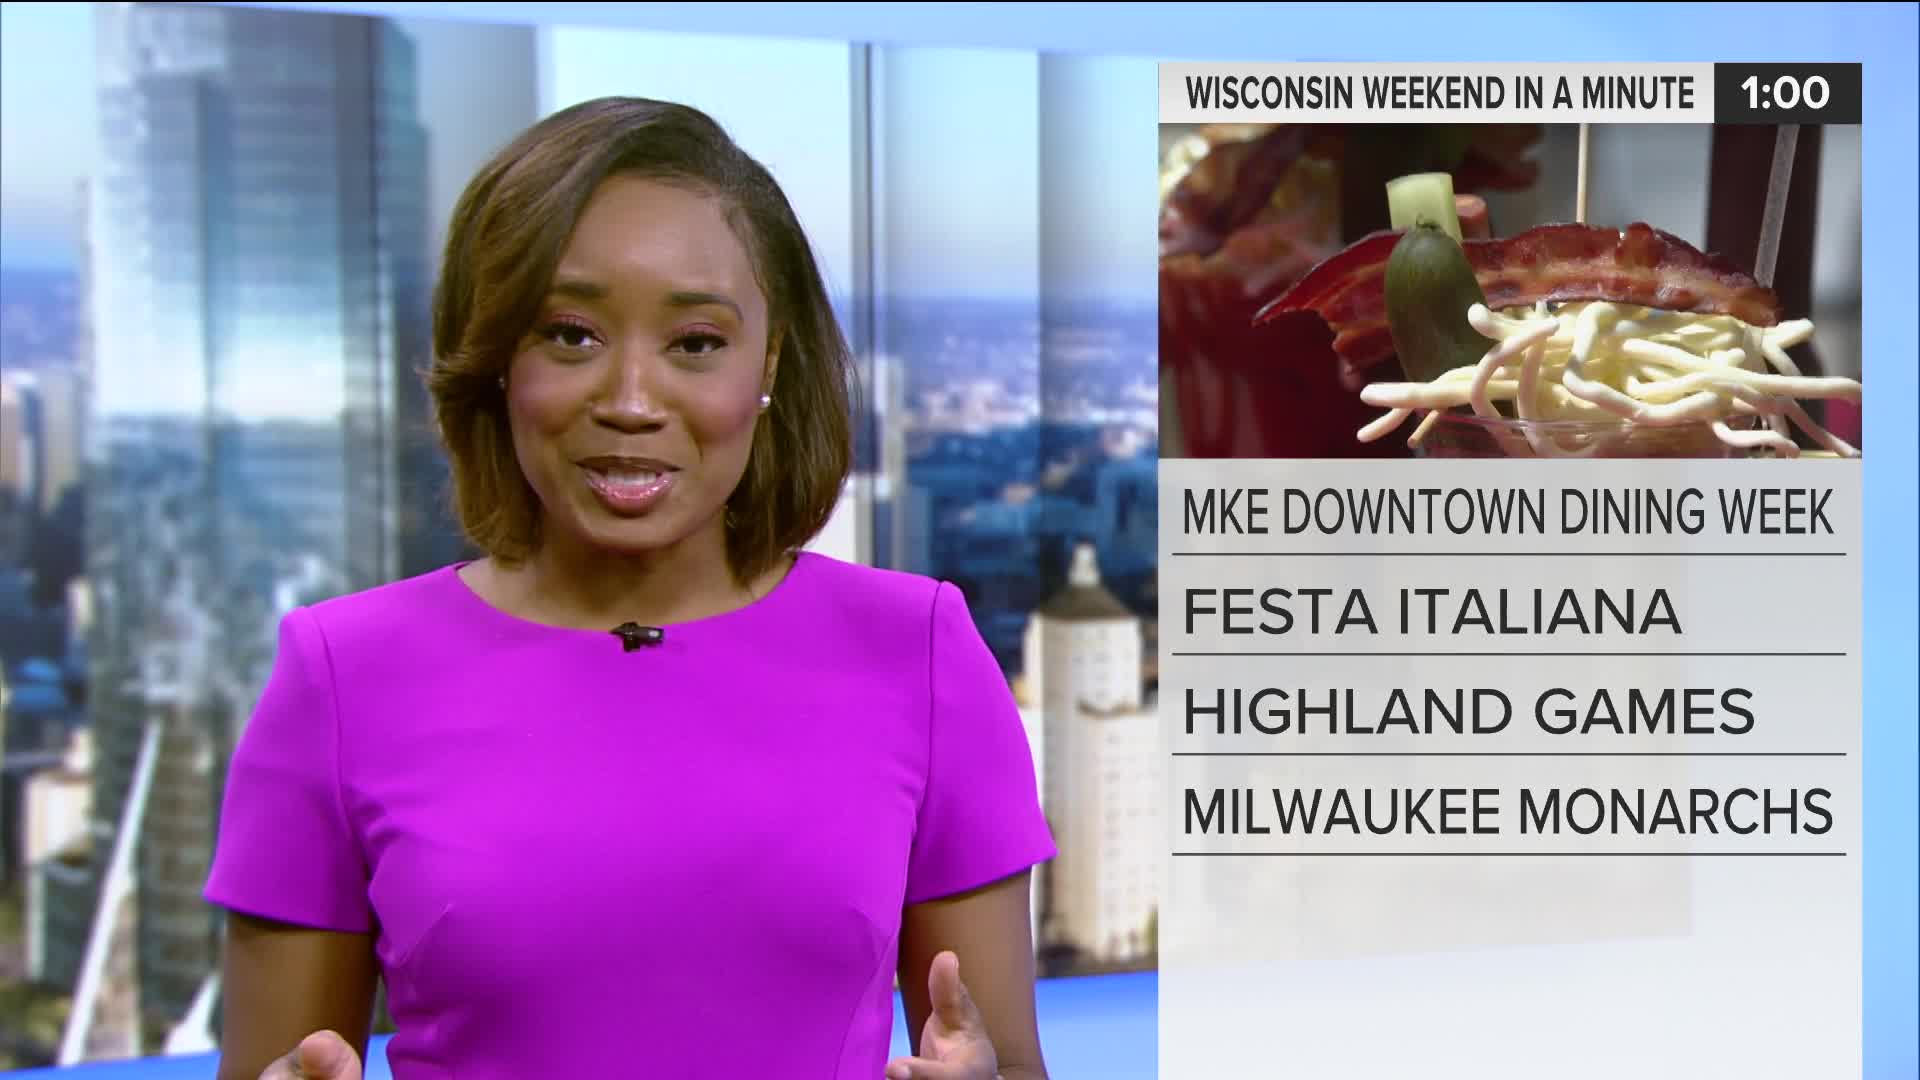 Wisconsin Weekend in a Minute: Downtown Dining Week, Festa Italiana, and Milwaukee Highland Games